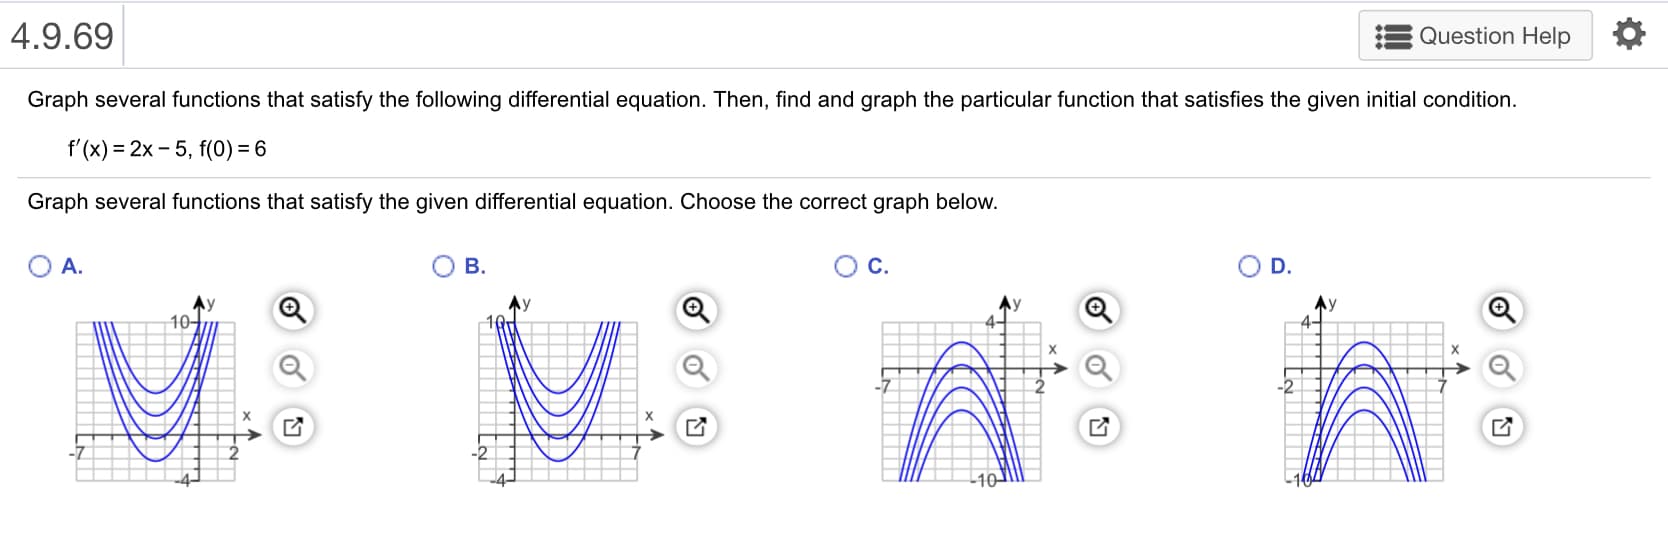 Question Help
4.9.69
Graph several functions that satisfy the following differential equation. Then, find and graph the particular function that satisfies the given initial condition
f'(x) = 2x-5, f(0) = 6
Graph several functions that satisfy the given differential equation. Choose the correct graph below
D.
A.
B.
C.
